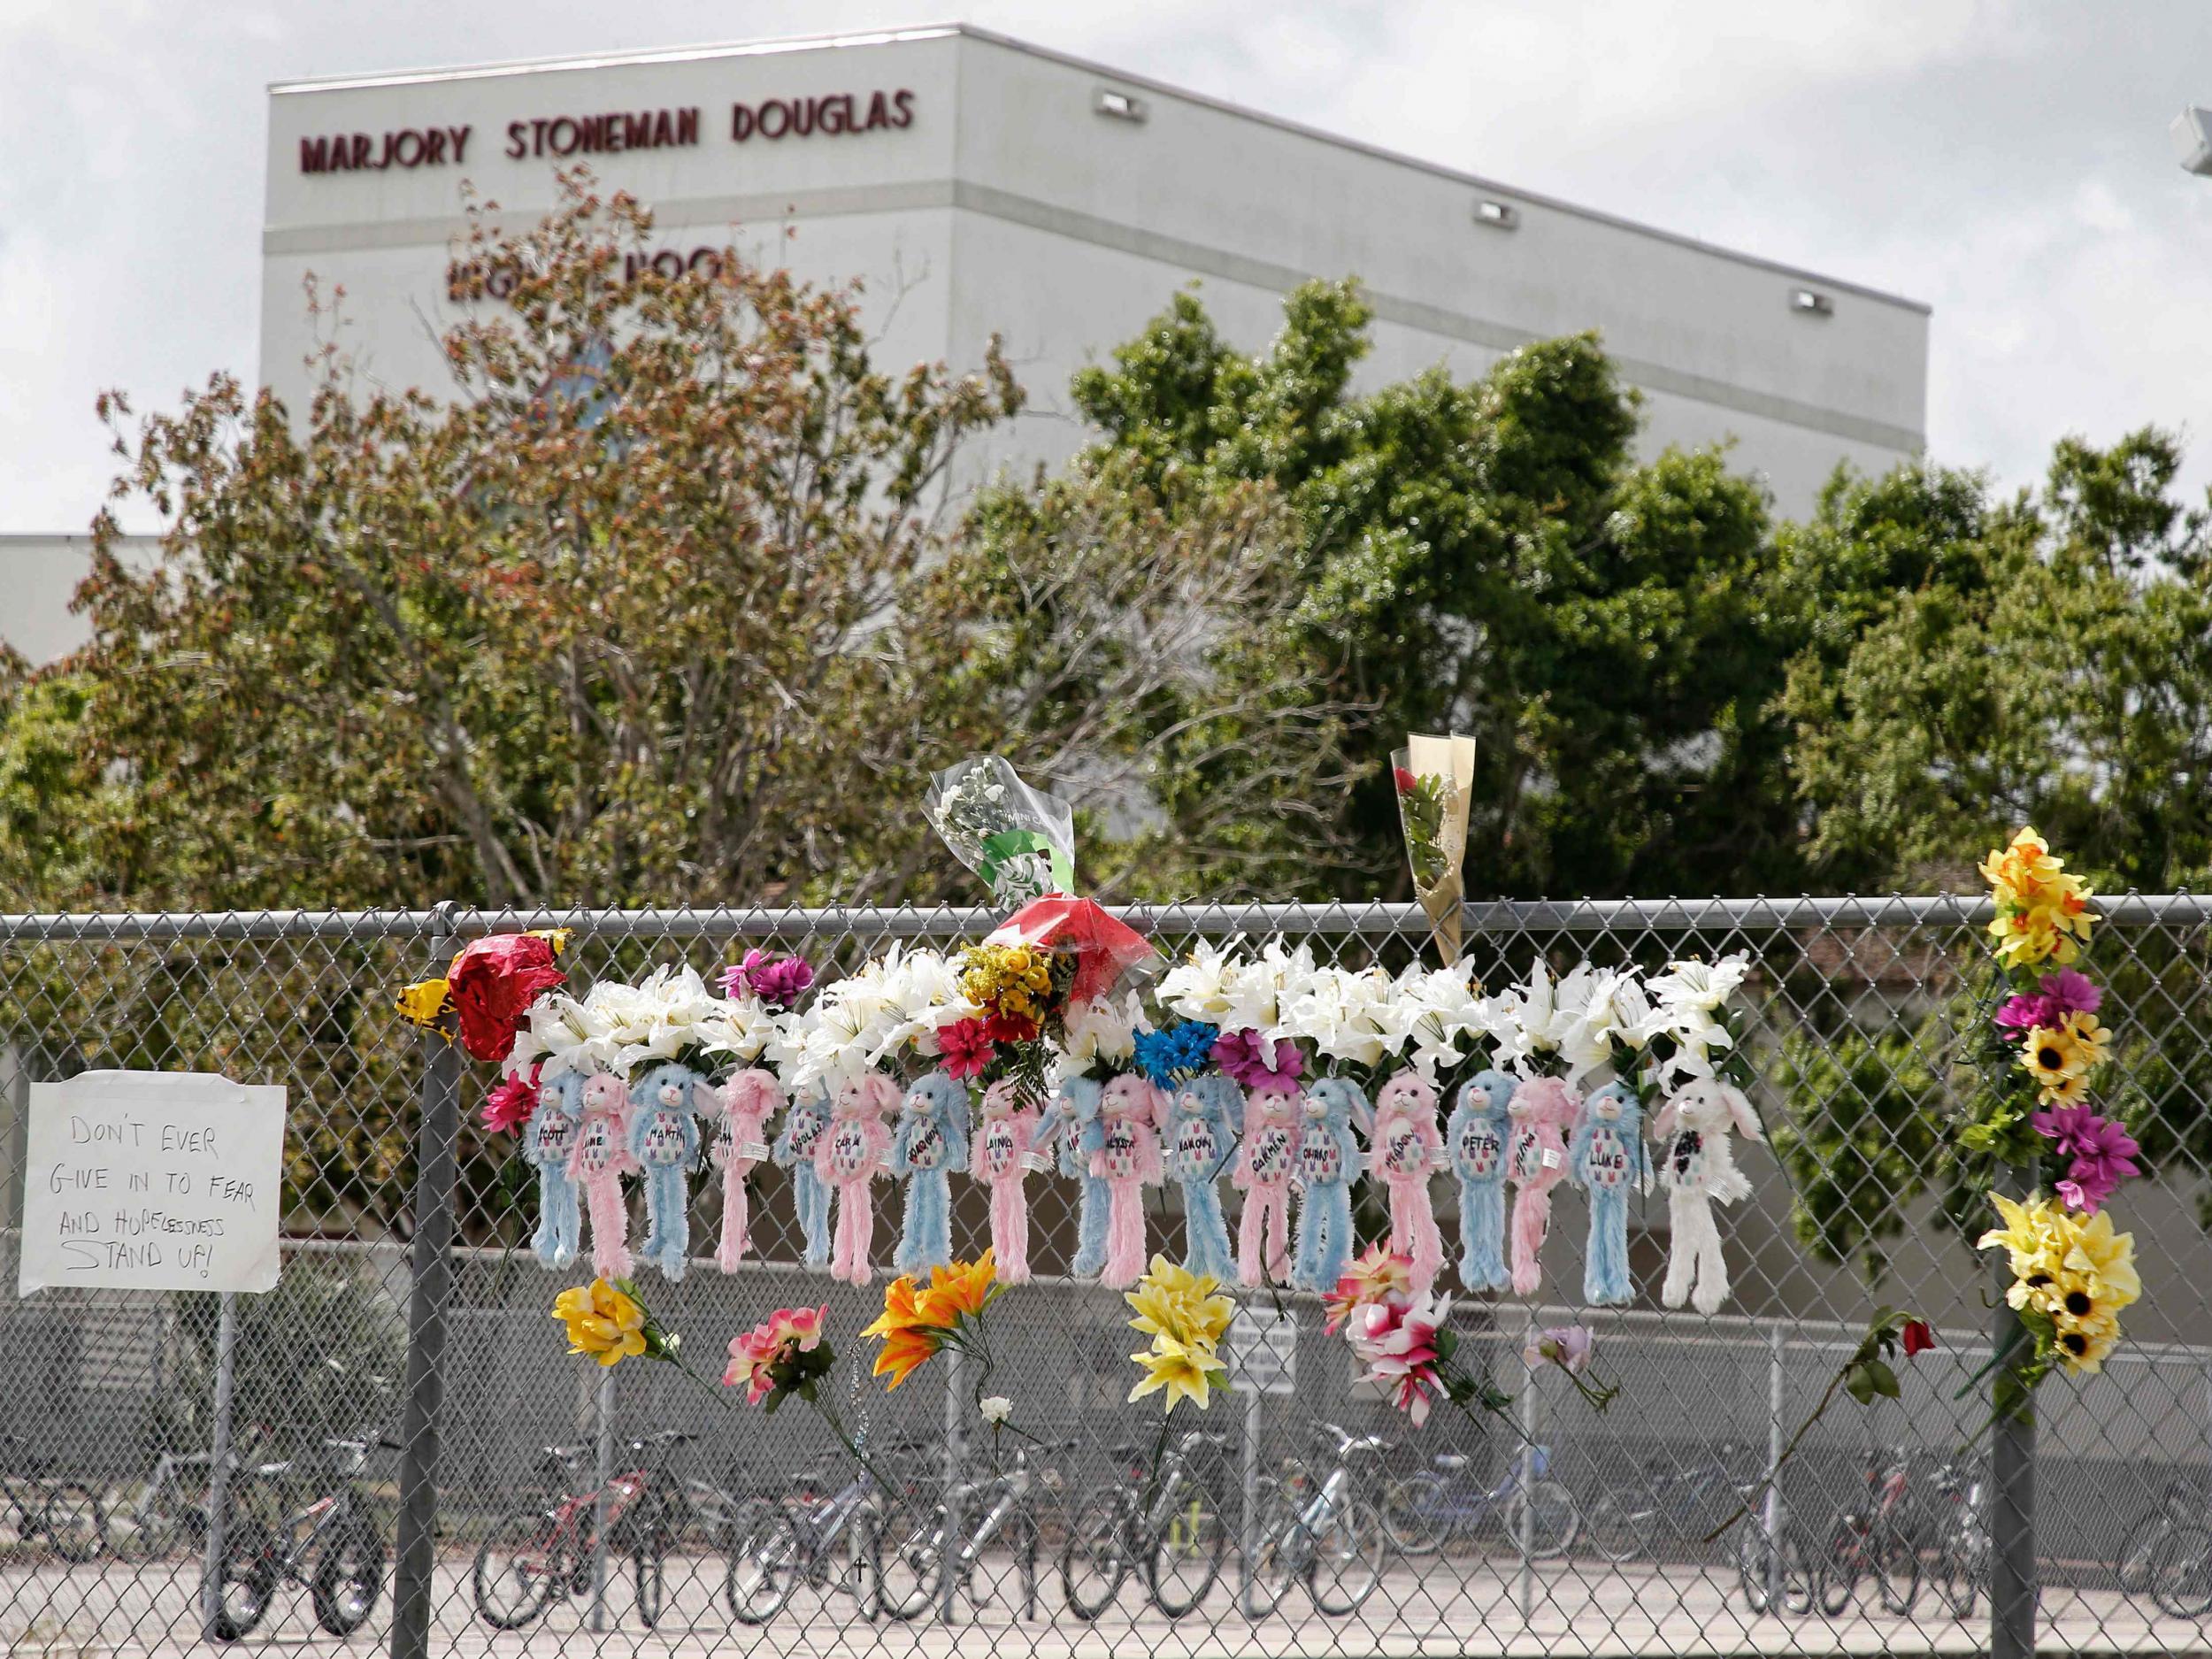 17 people died and many more were injured in the shooting at a Florida high school